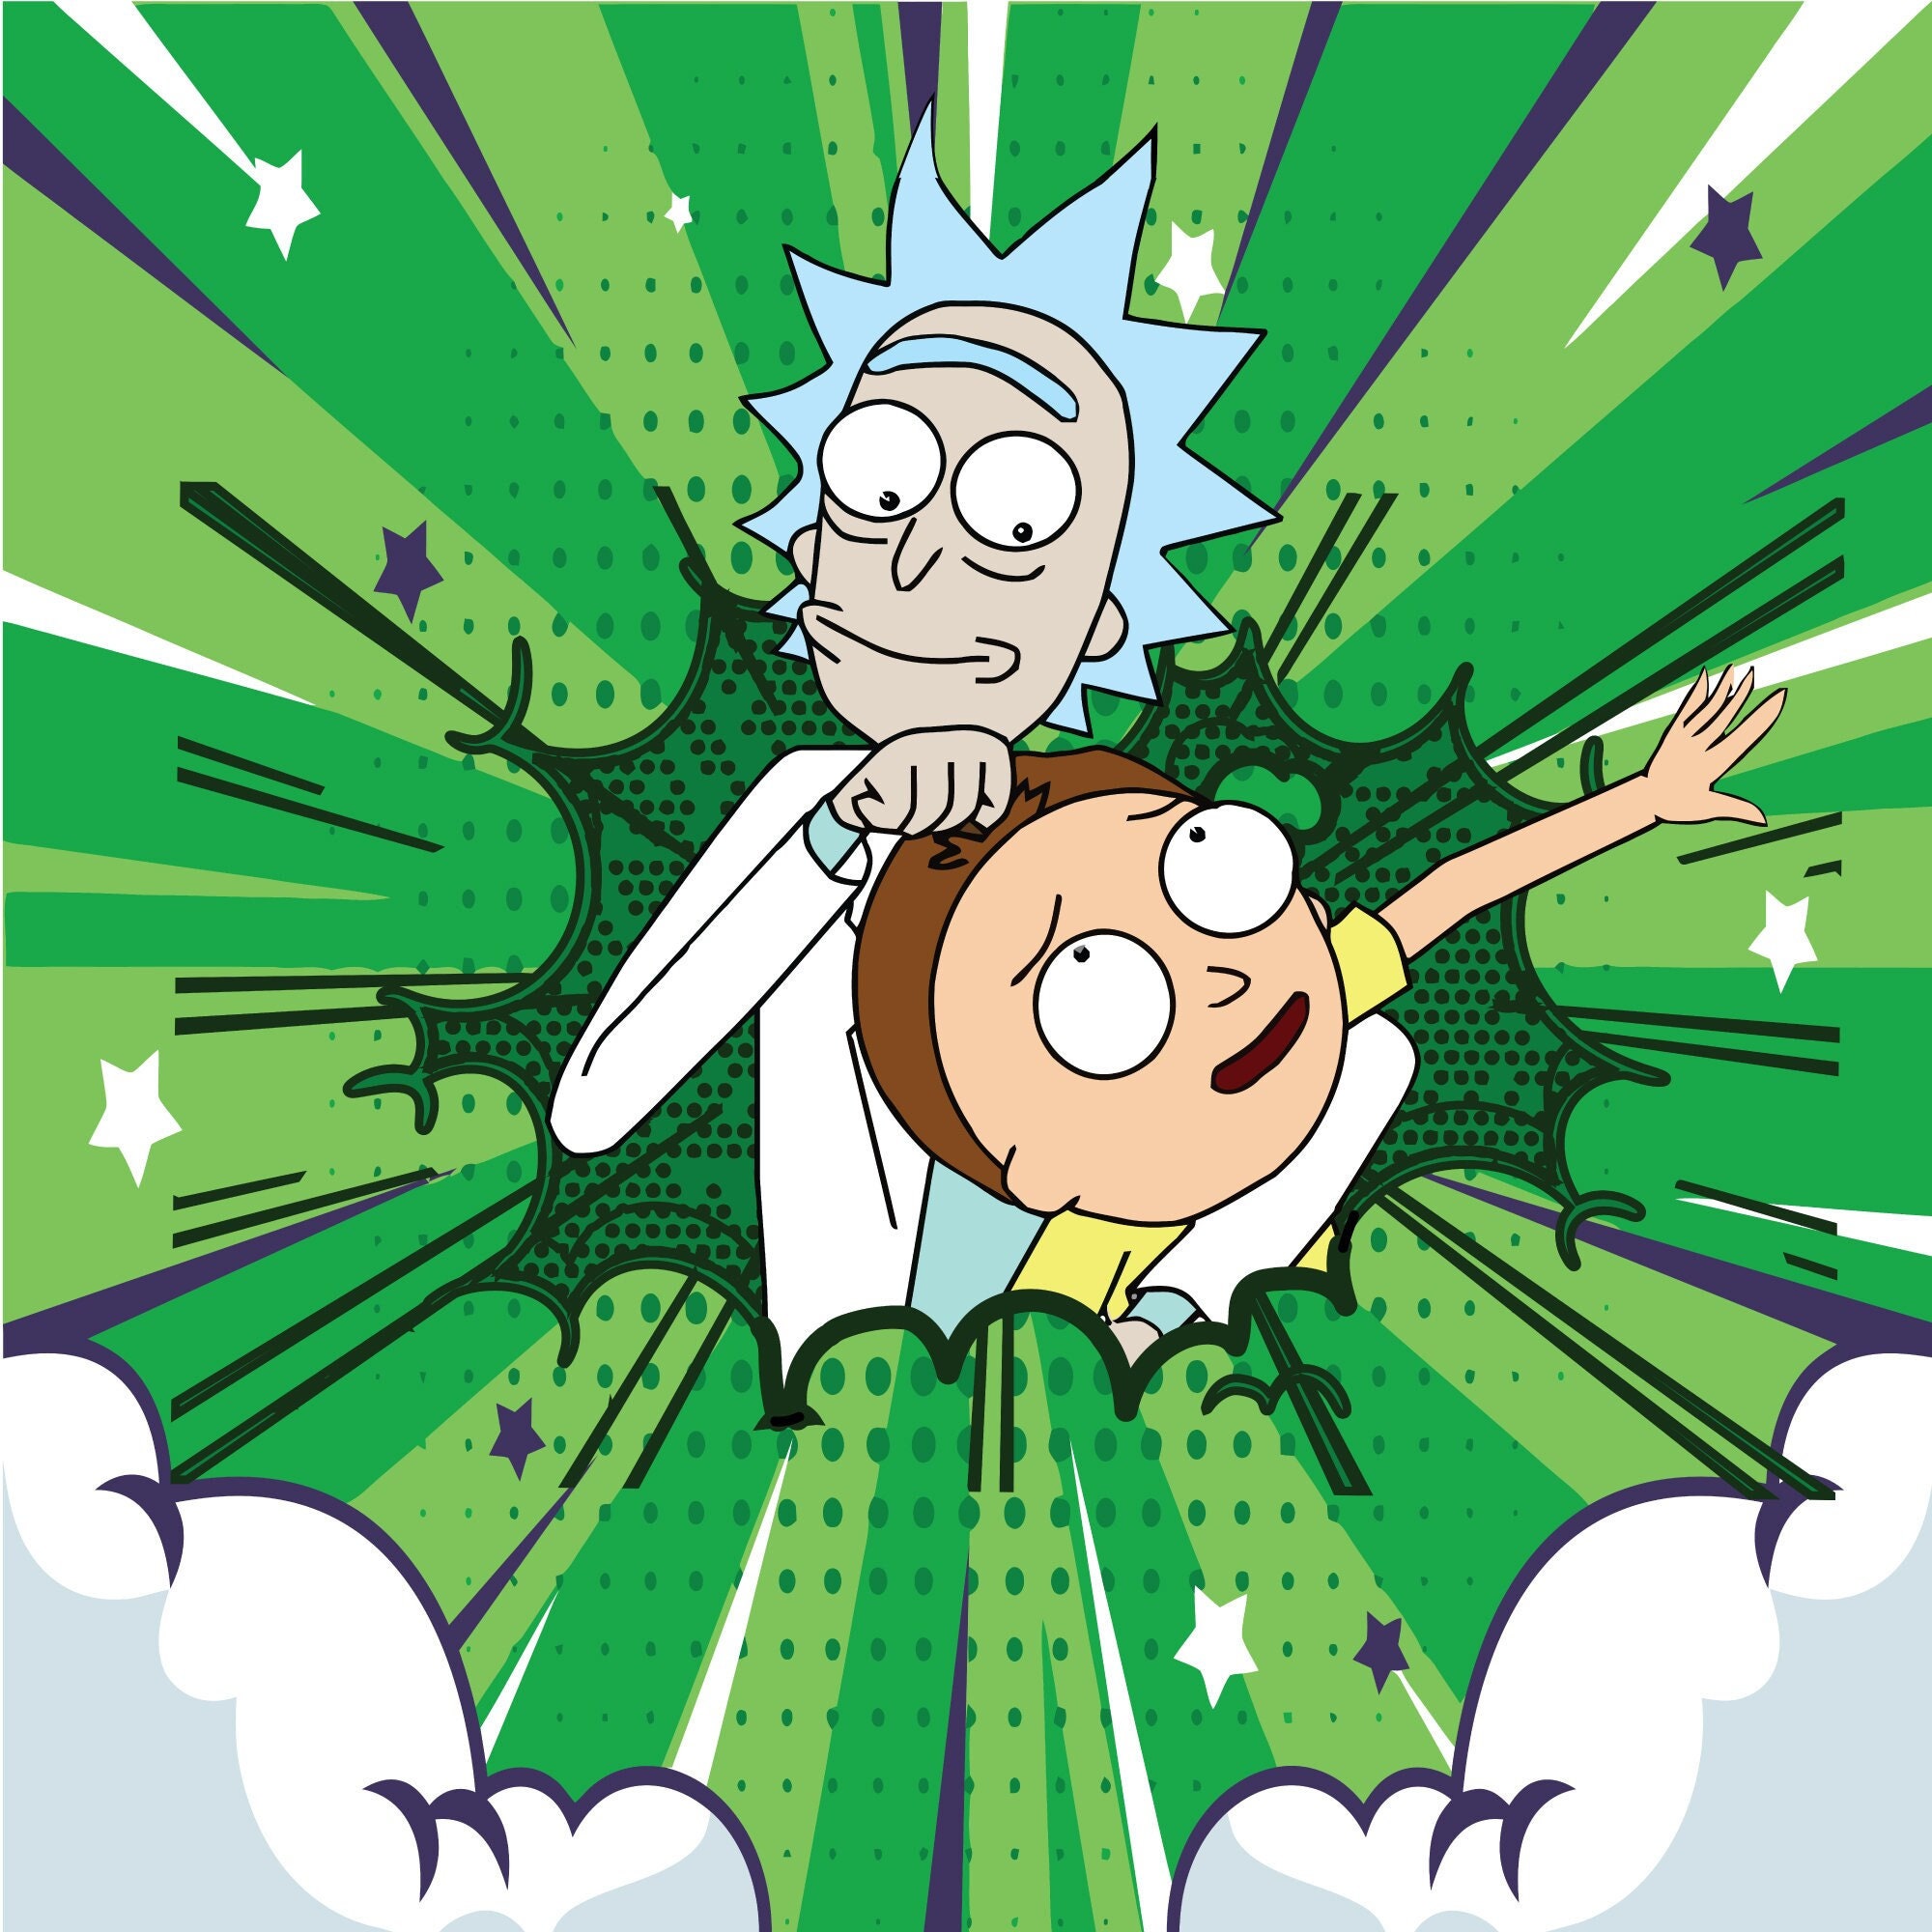 Rick and Morty Premiere #1 Most-Viewed Cable Program With Young Viewers |  Pressroom